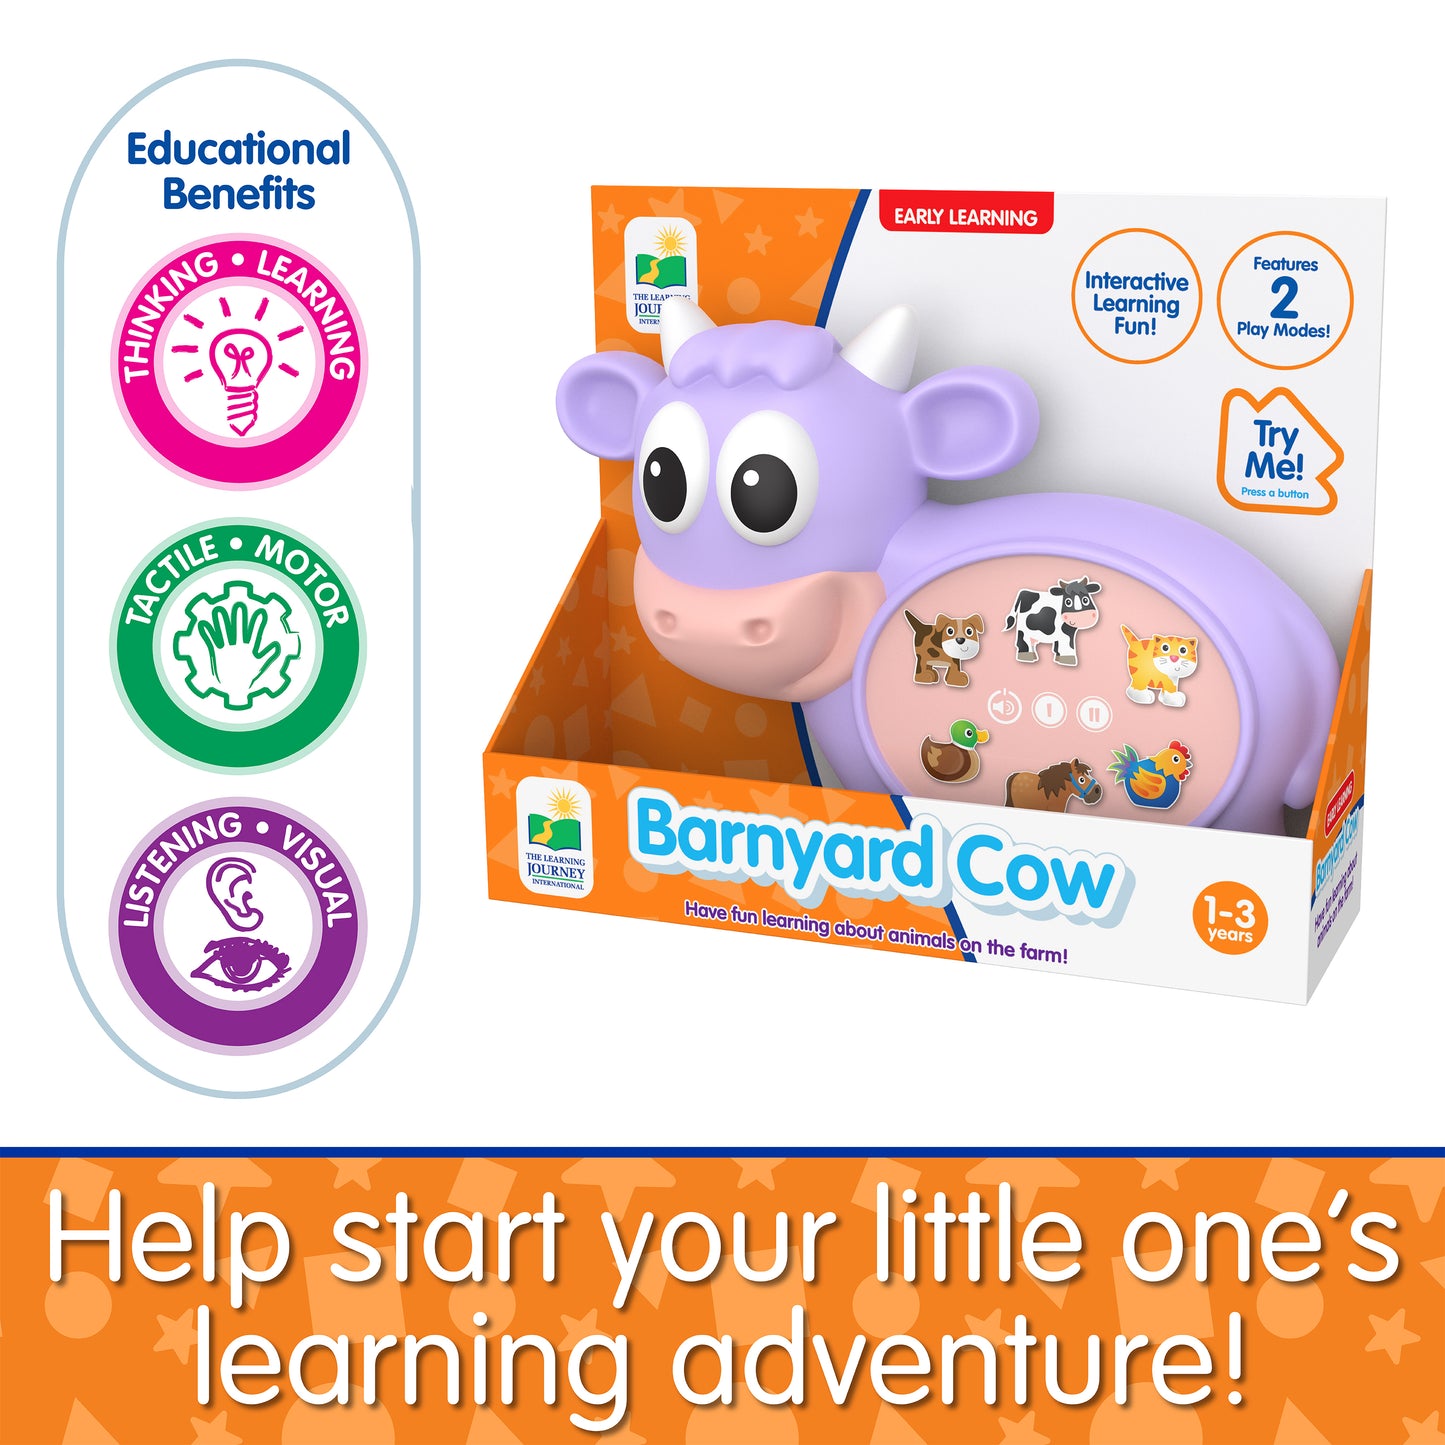 Infographic about Barnyard Cow's educational benefits